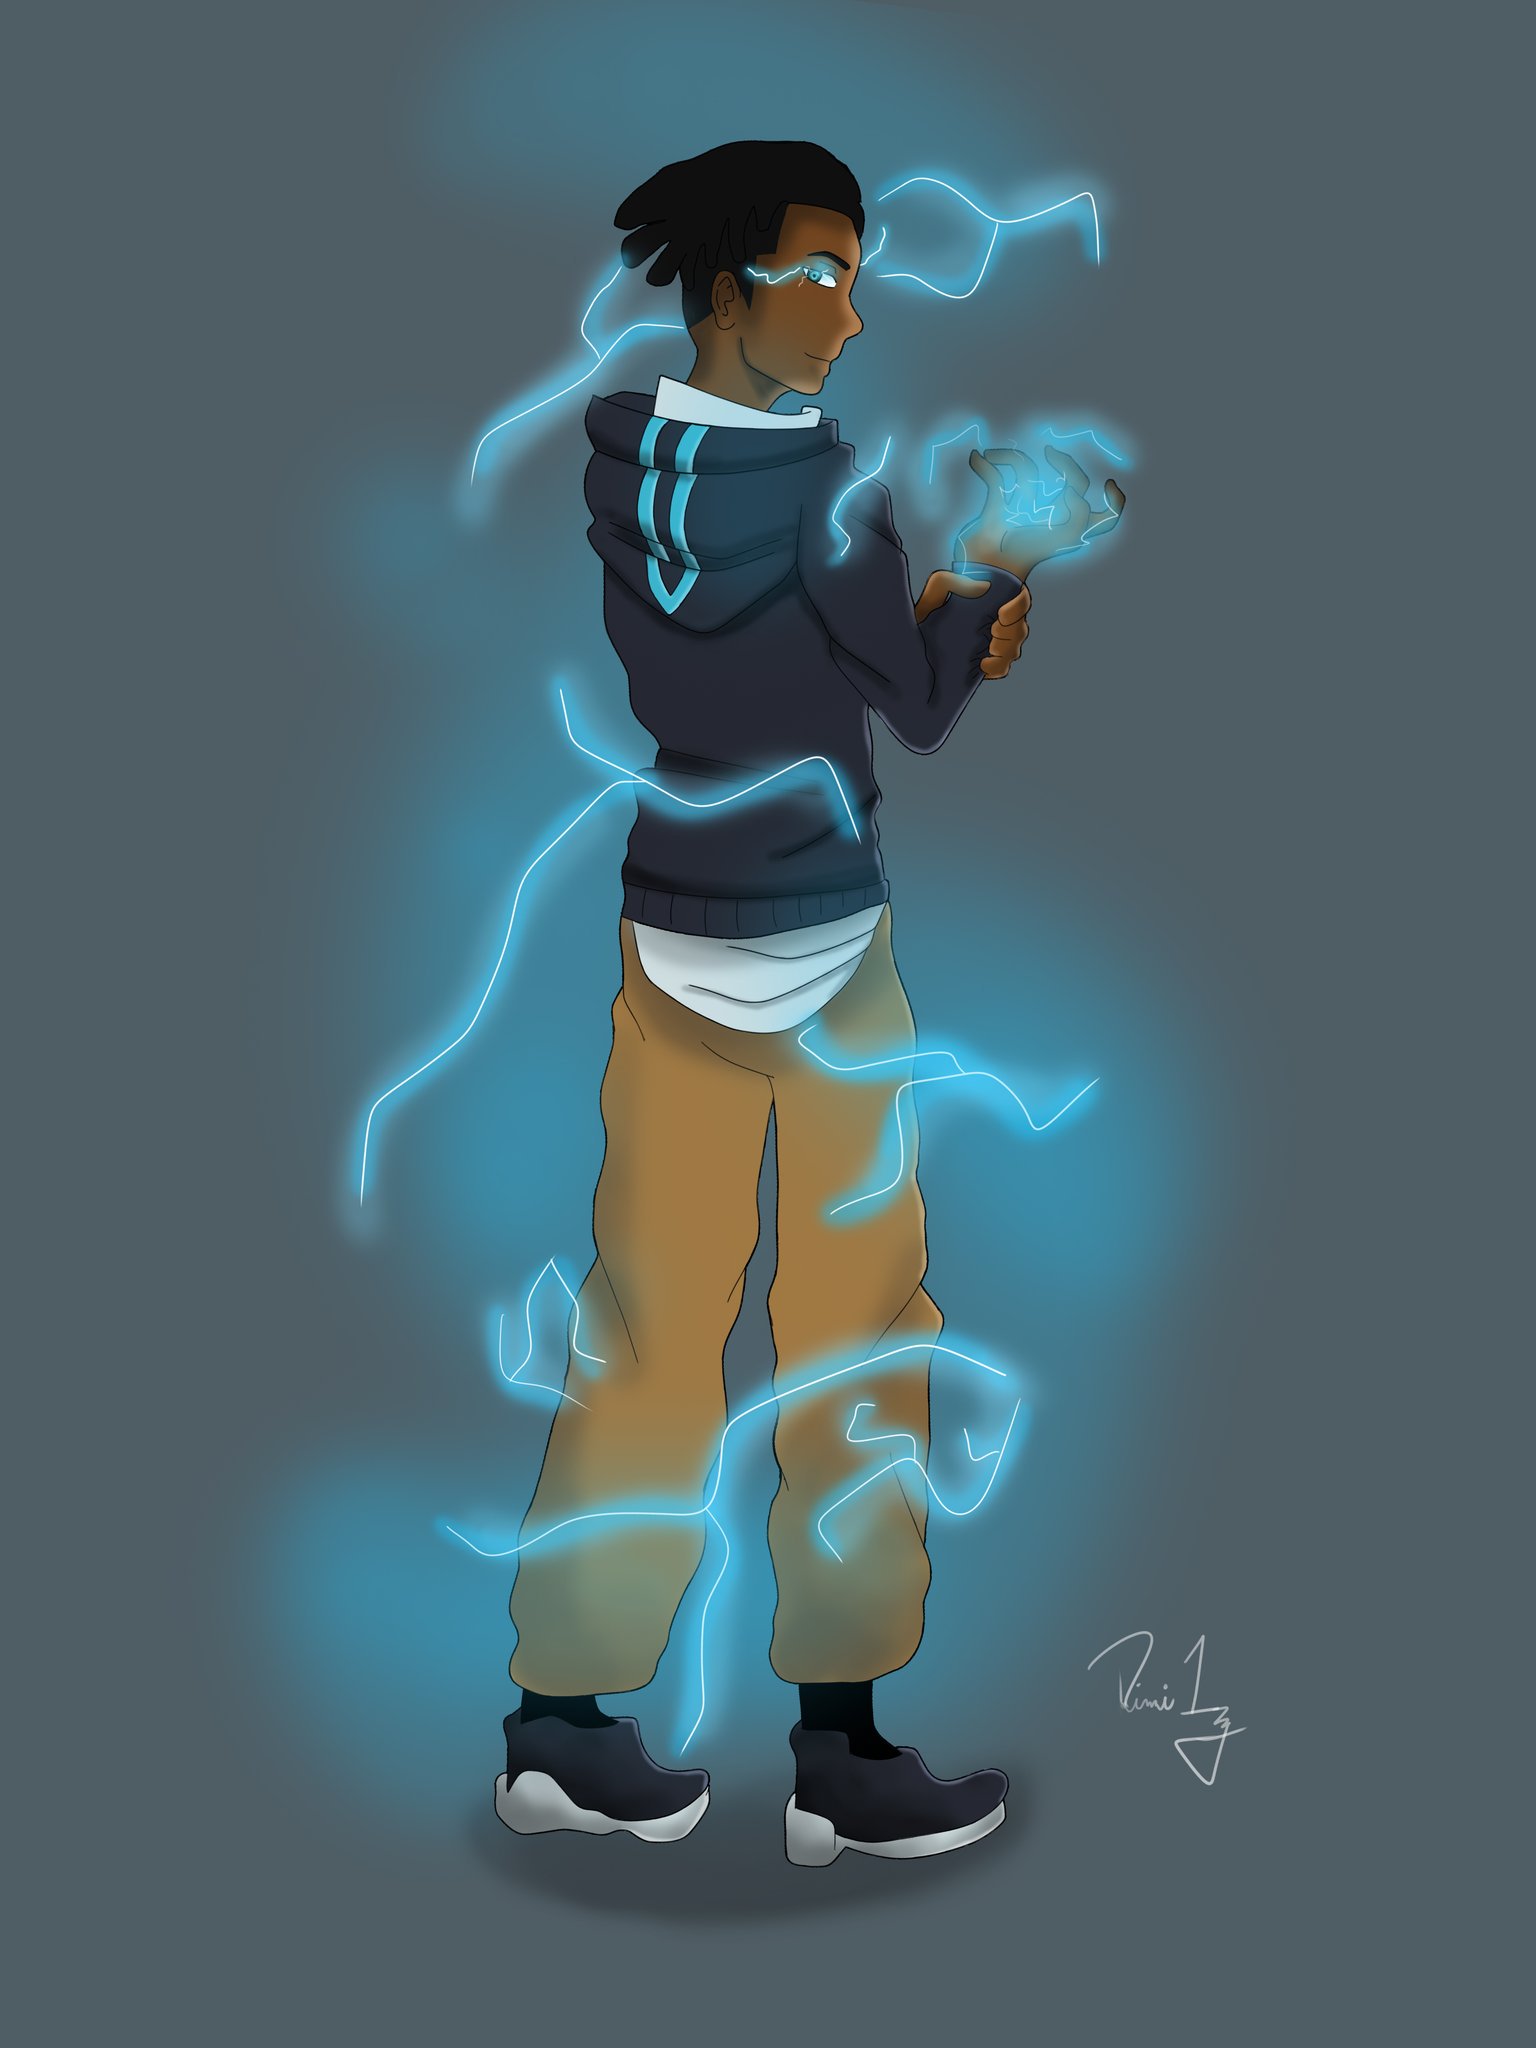 Anime boy with electric powers